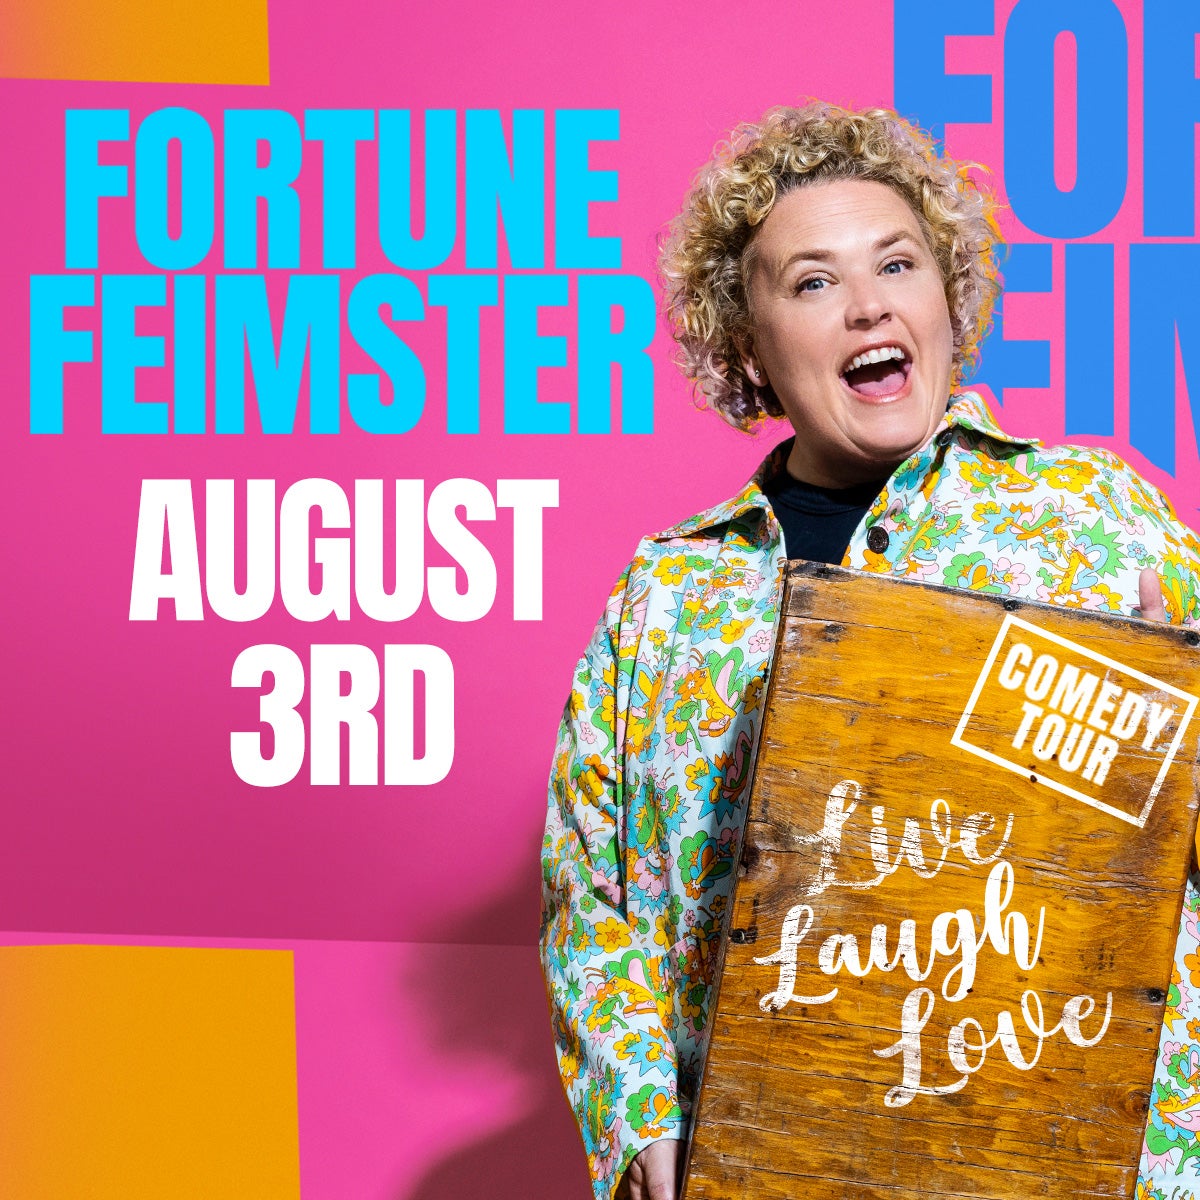 fortune feimster tour tickets